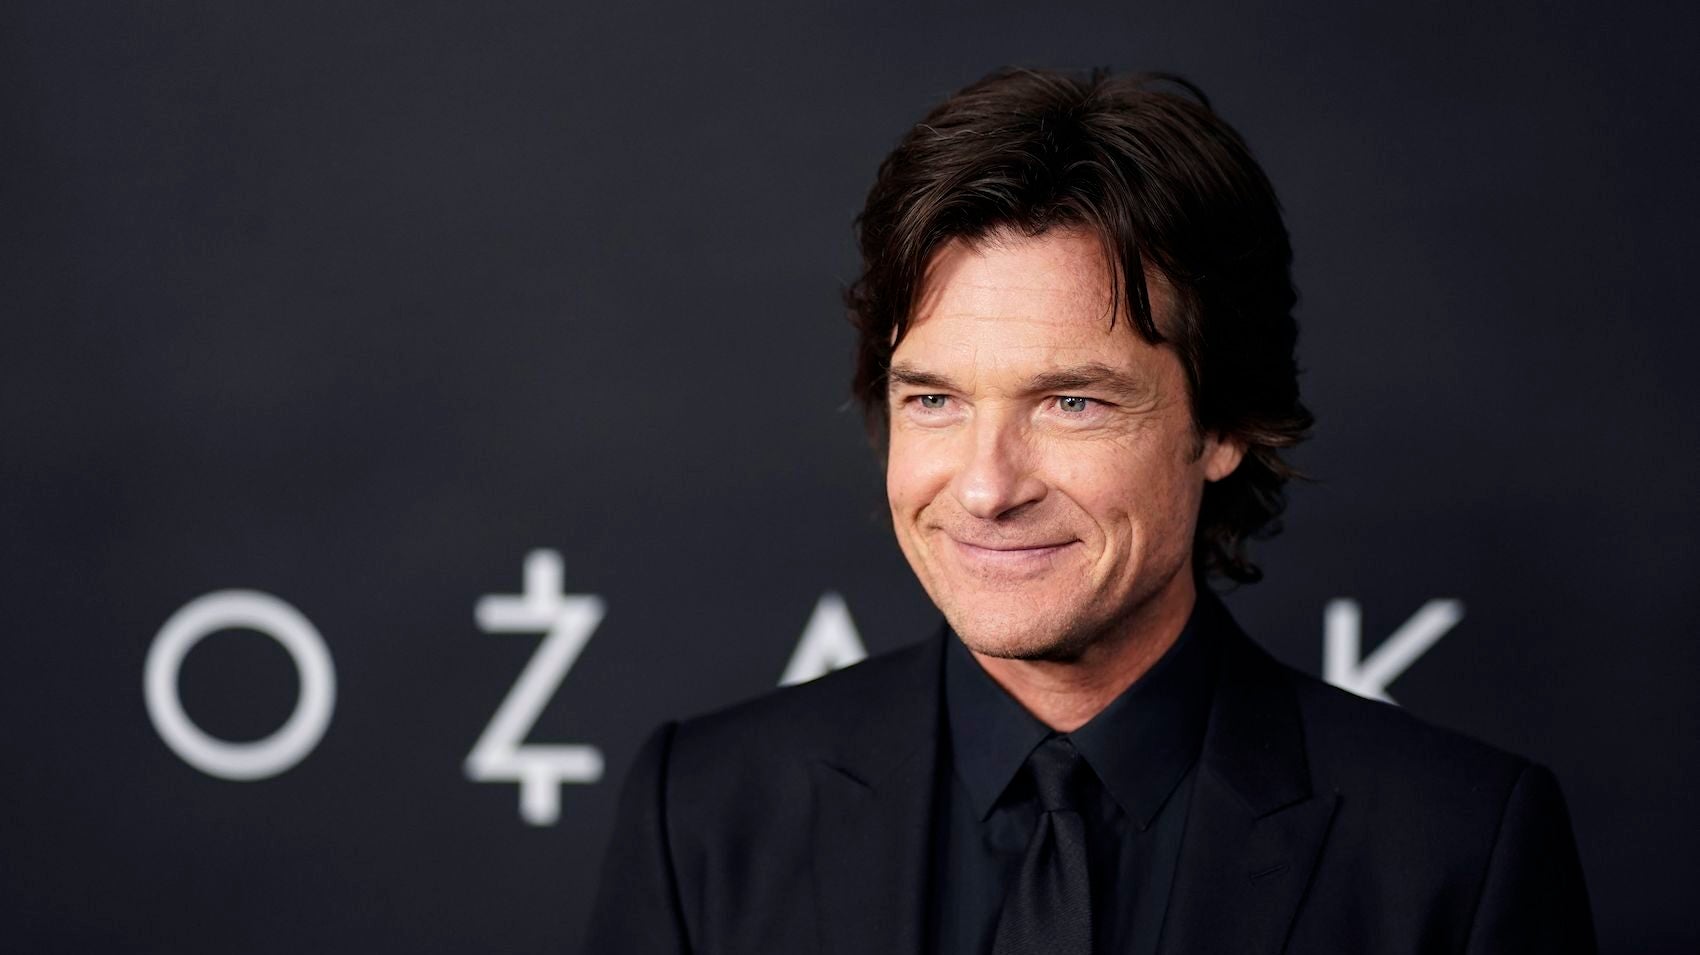 Jason Bateman attends the world premiere of the final episodes of "Ozark" at the Paris Theater on Thursday, April 21, 2022, in New York. 